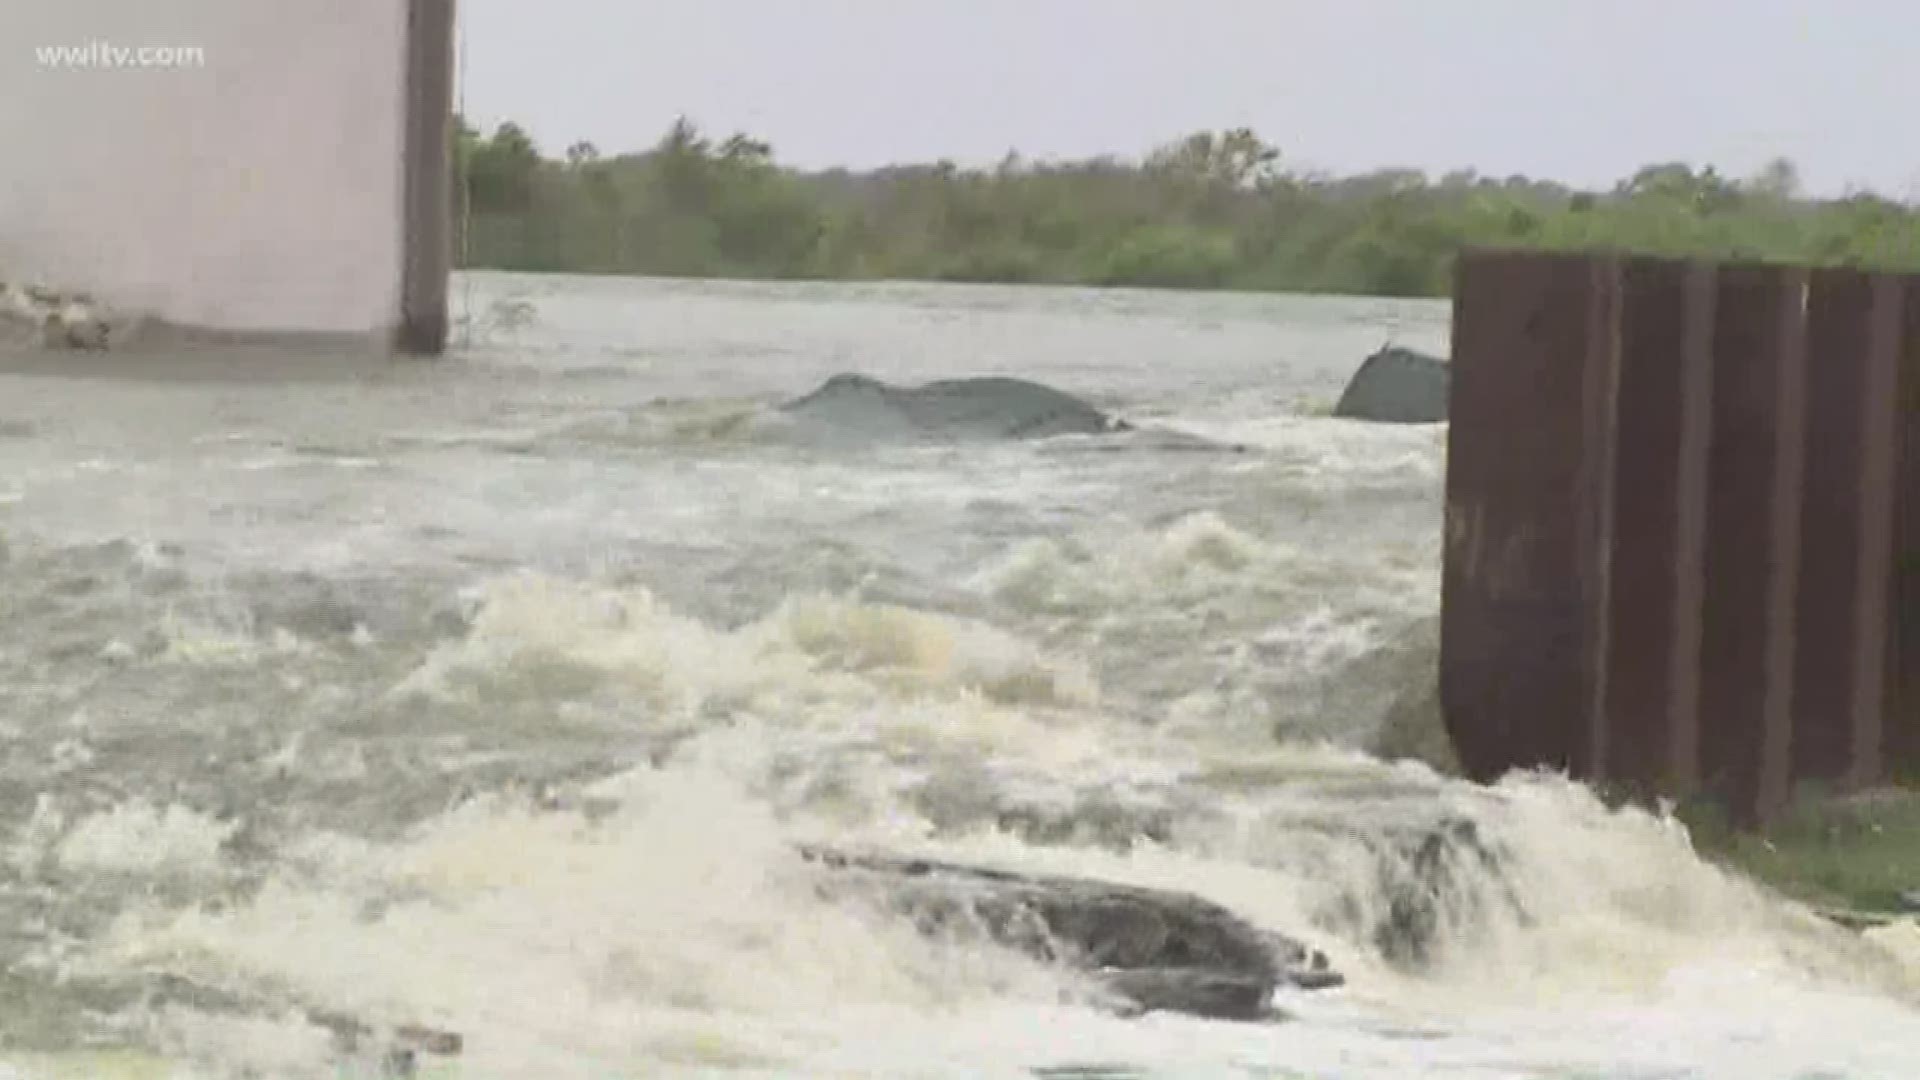 Water is rushing over a back levee that protects areas of Plaquemines Parish. There appear to be two gaps